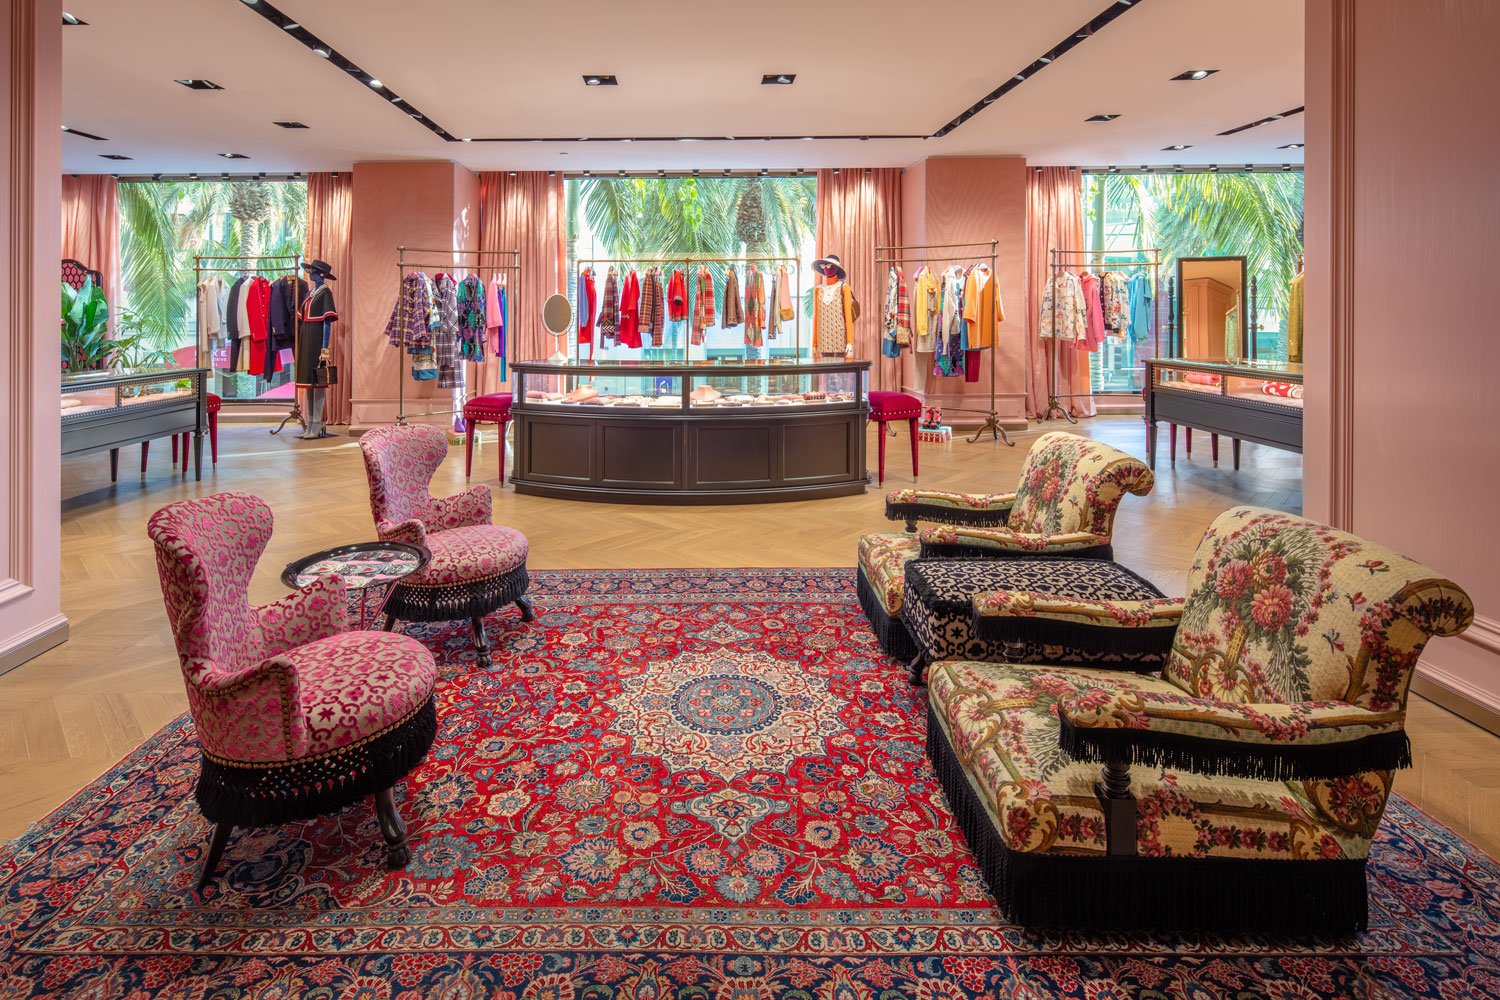 Gucci - The Gucci Store on Rodeo Drive in Beverly Hills